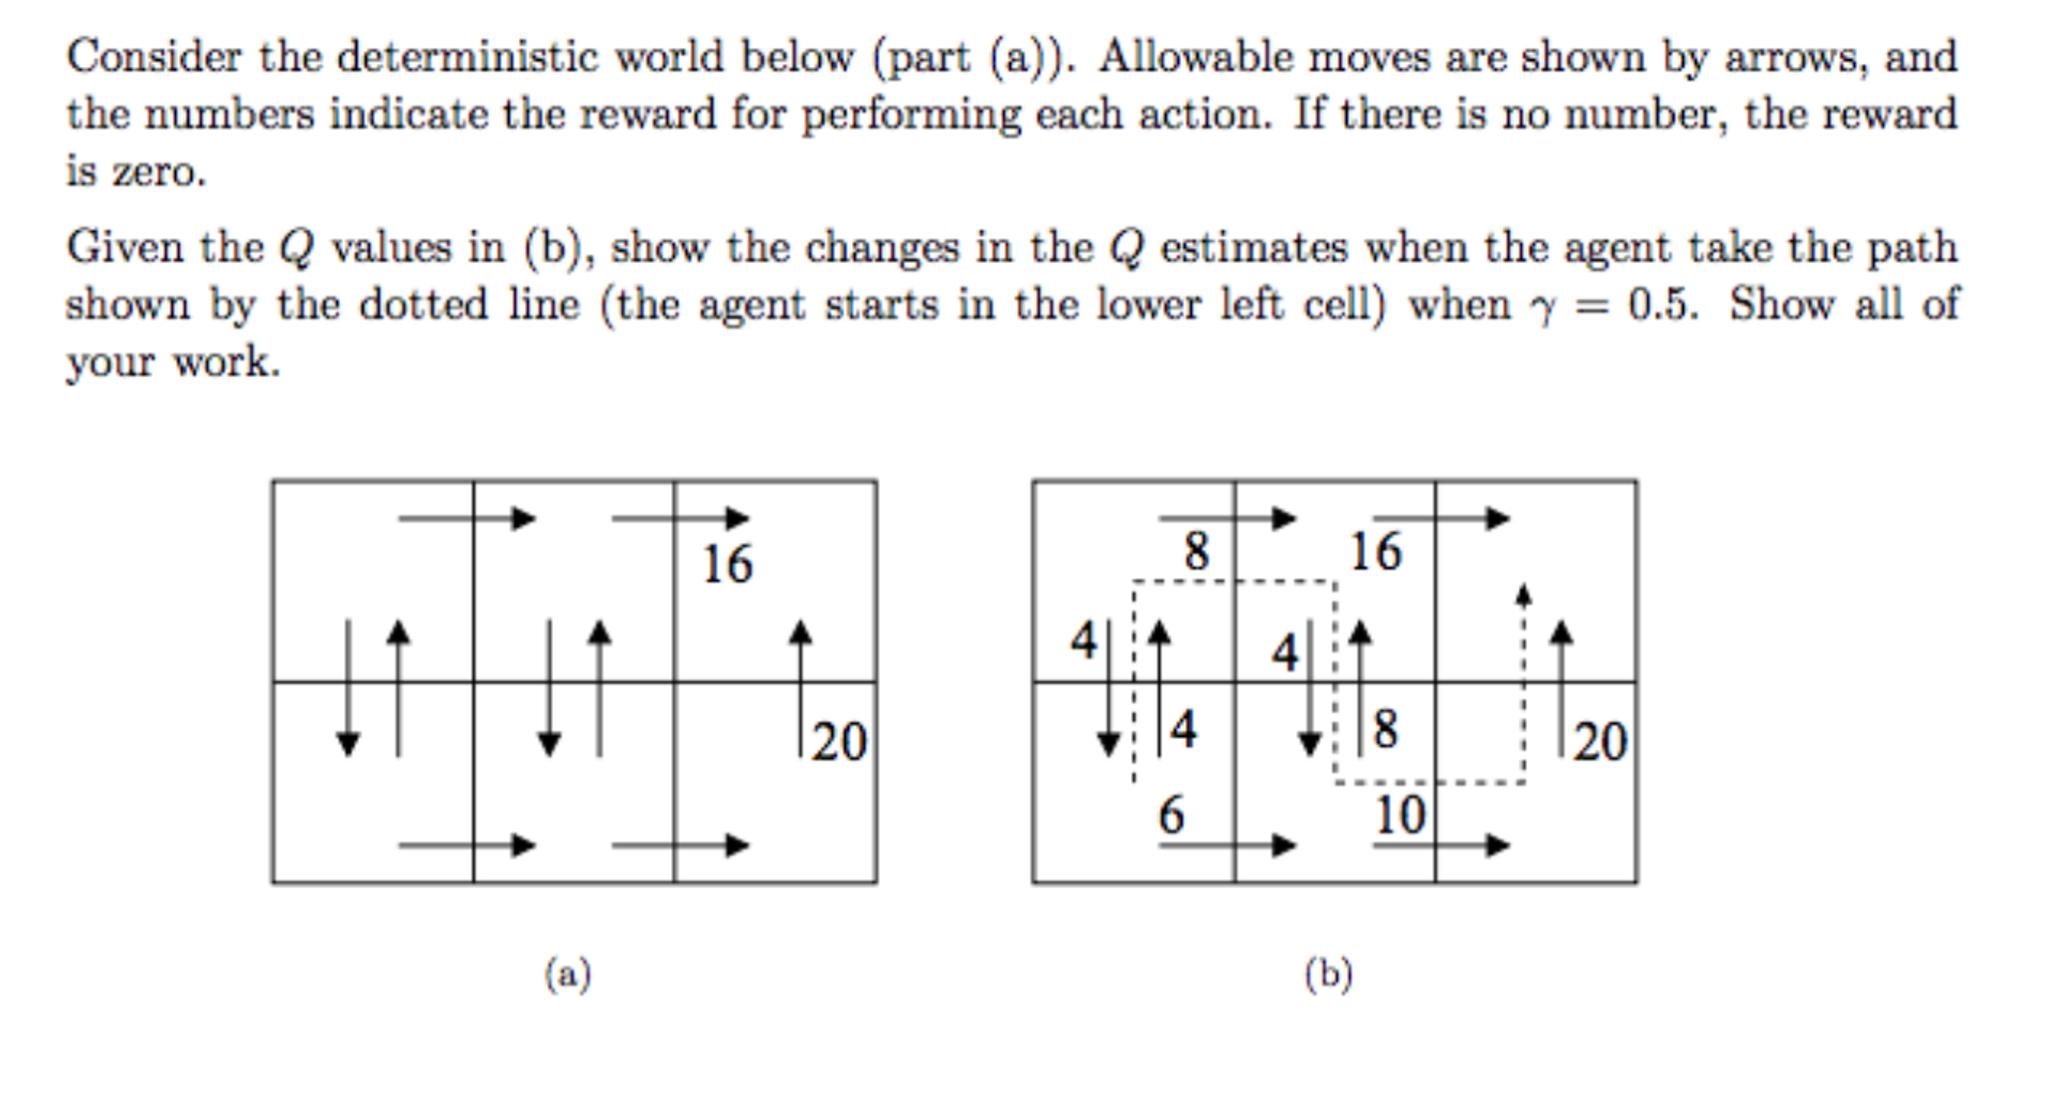 Consider the deterministic world below (part (a)).